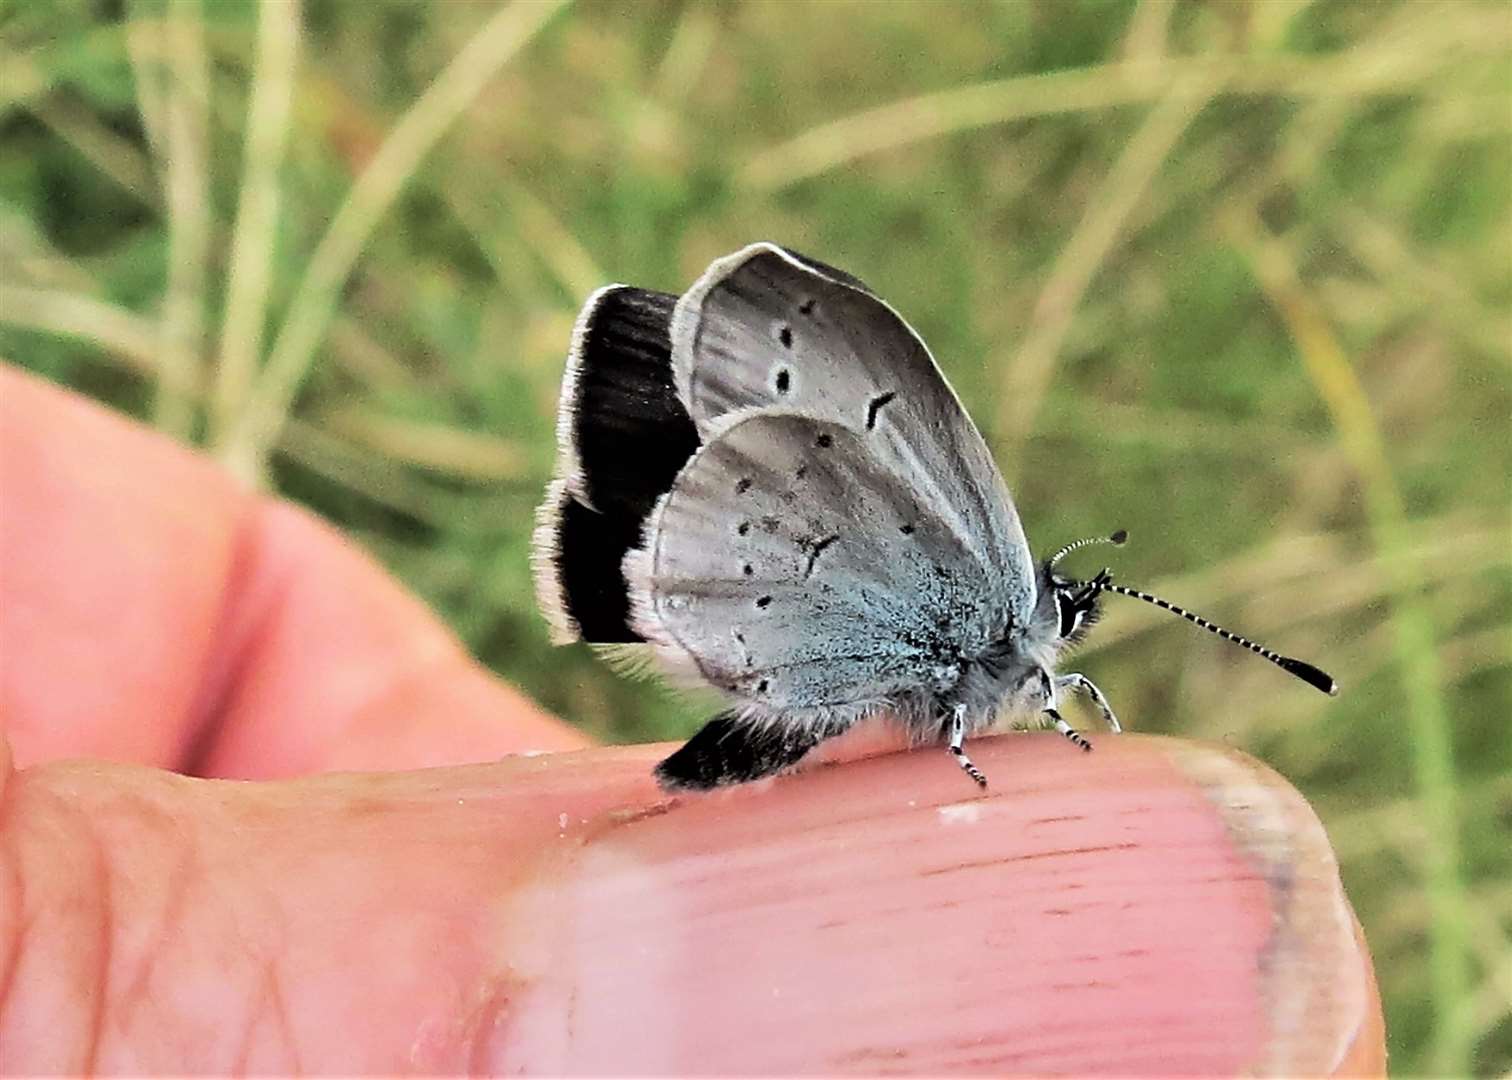 Small blue butterfly with wings drying.